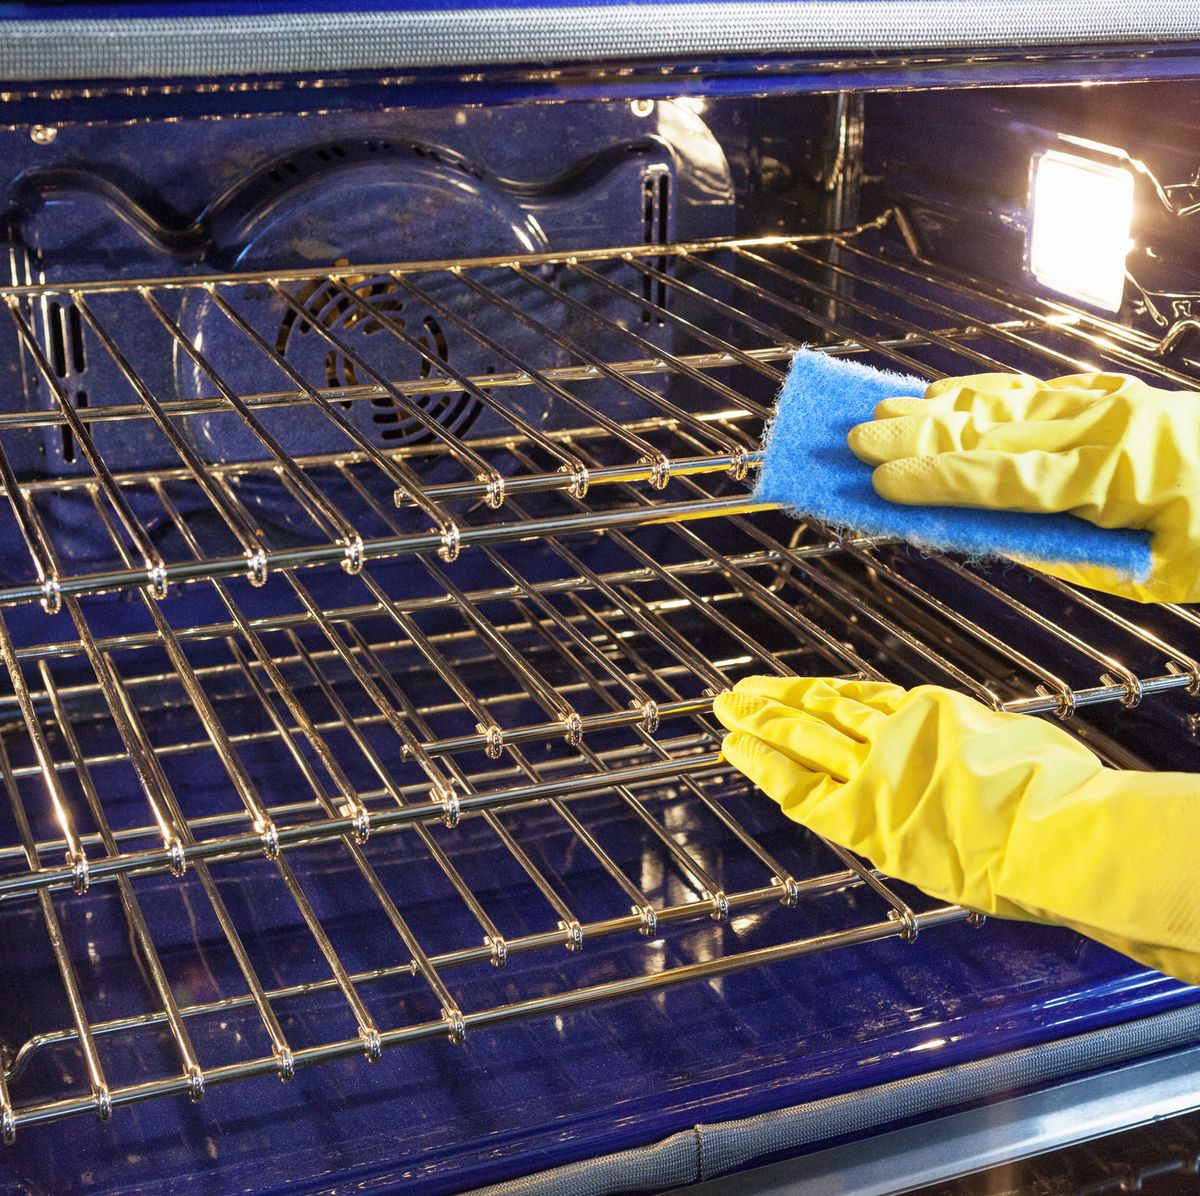 How To Clean Your Oven Without Scrubbing